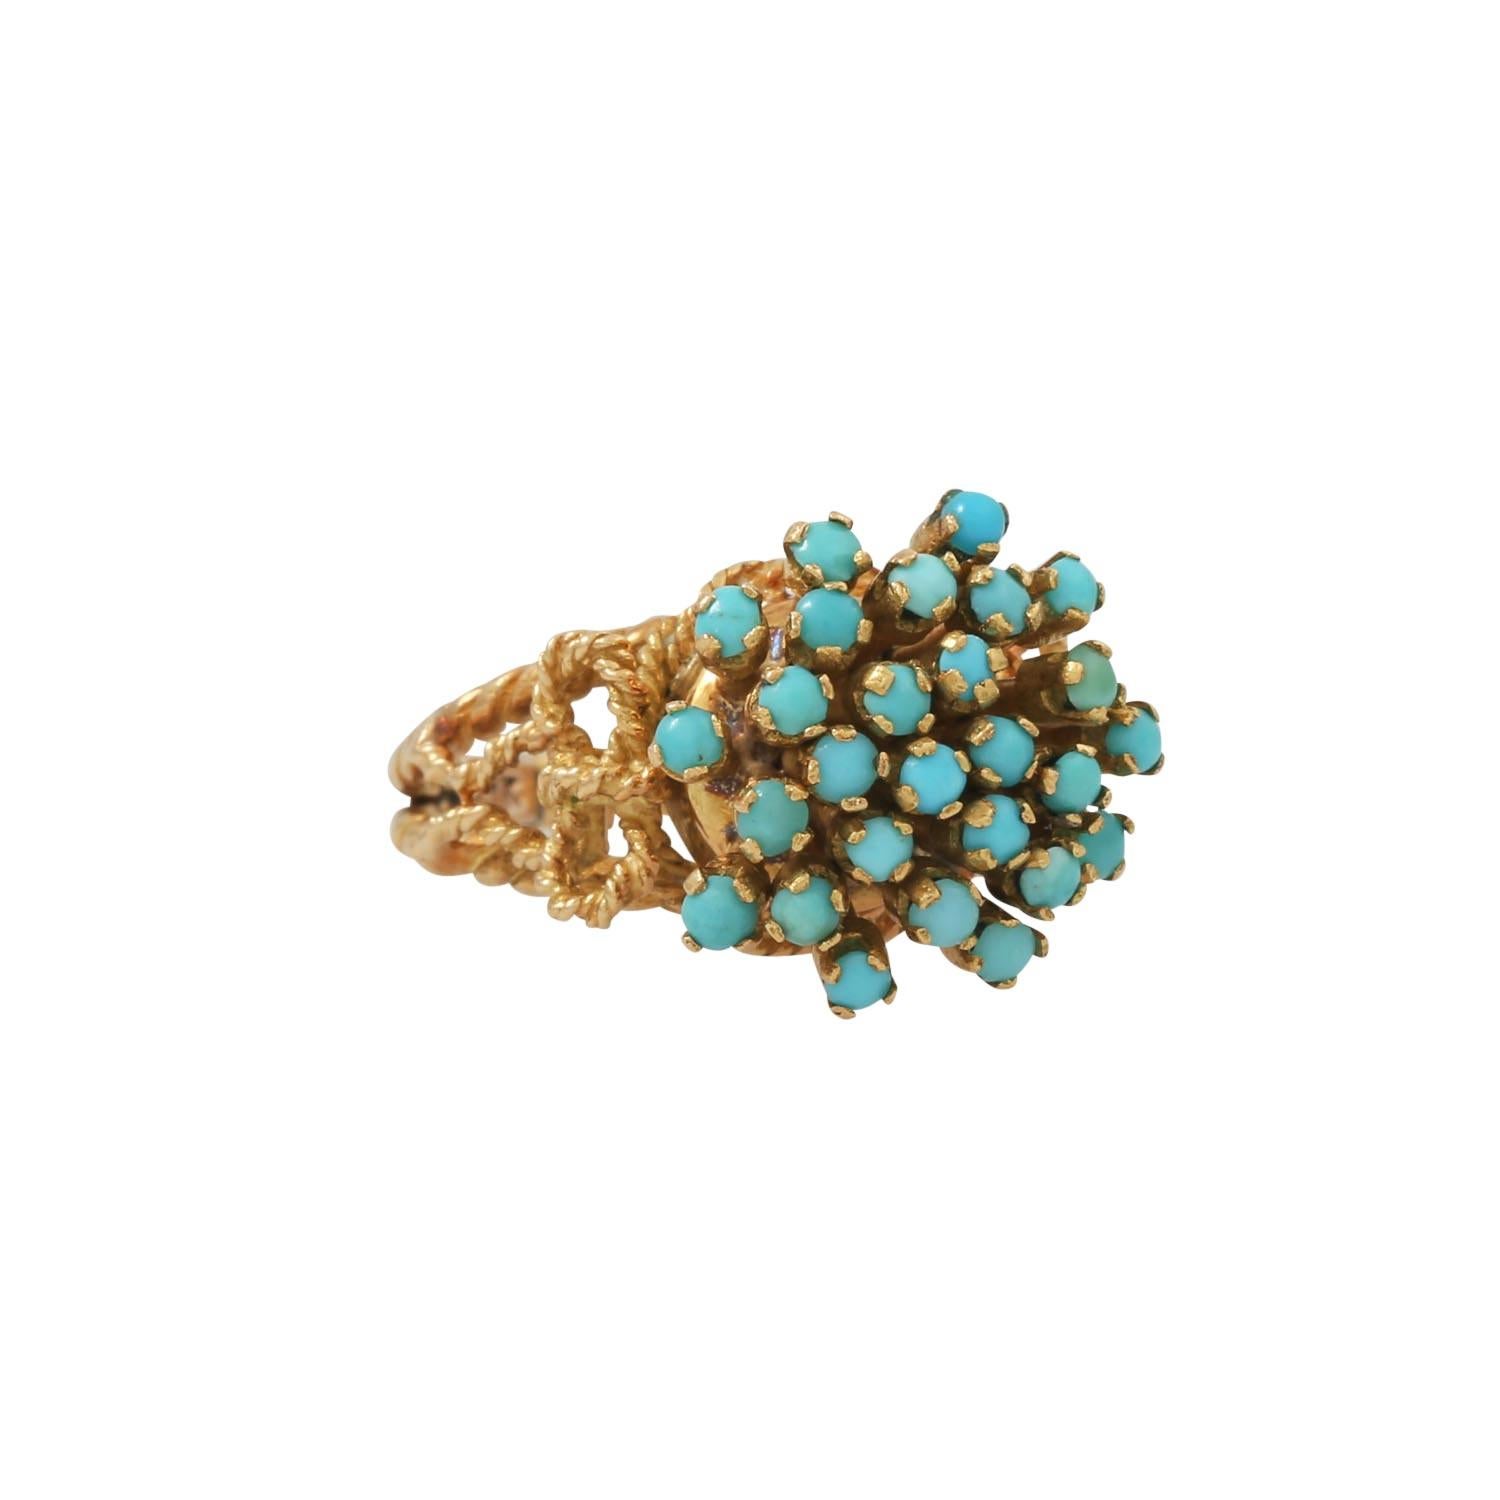 GG 18K, 10 g, RW: 51, Mexico 20th century, signs of wear.

 Ring with small turquoises, 18K yellow gold, 10 g, ring size 51, Mexico 20th century, signs of wear.